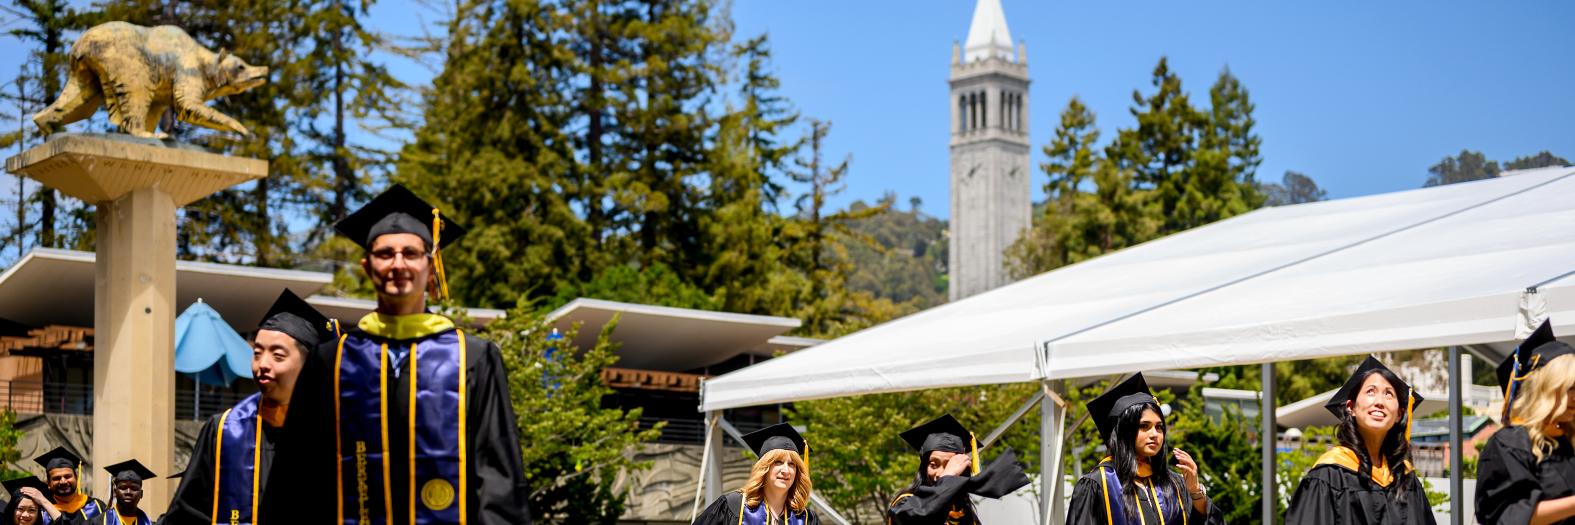 image of graduates walking outside, Campanile tower and a blue sky in the backgroun